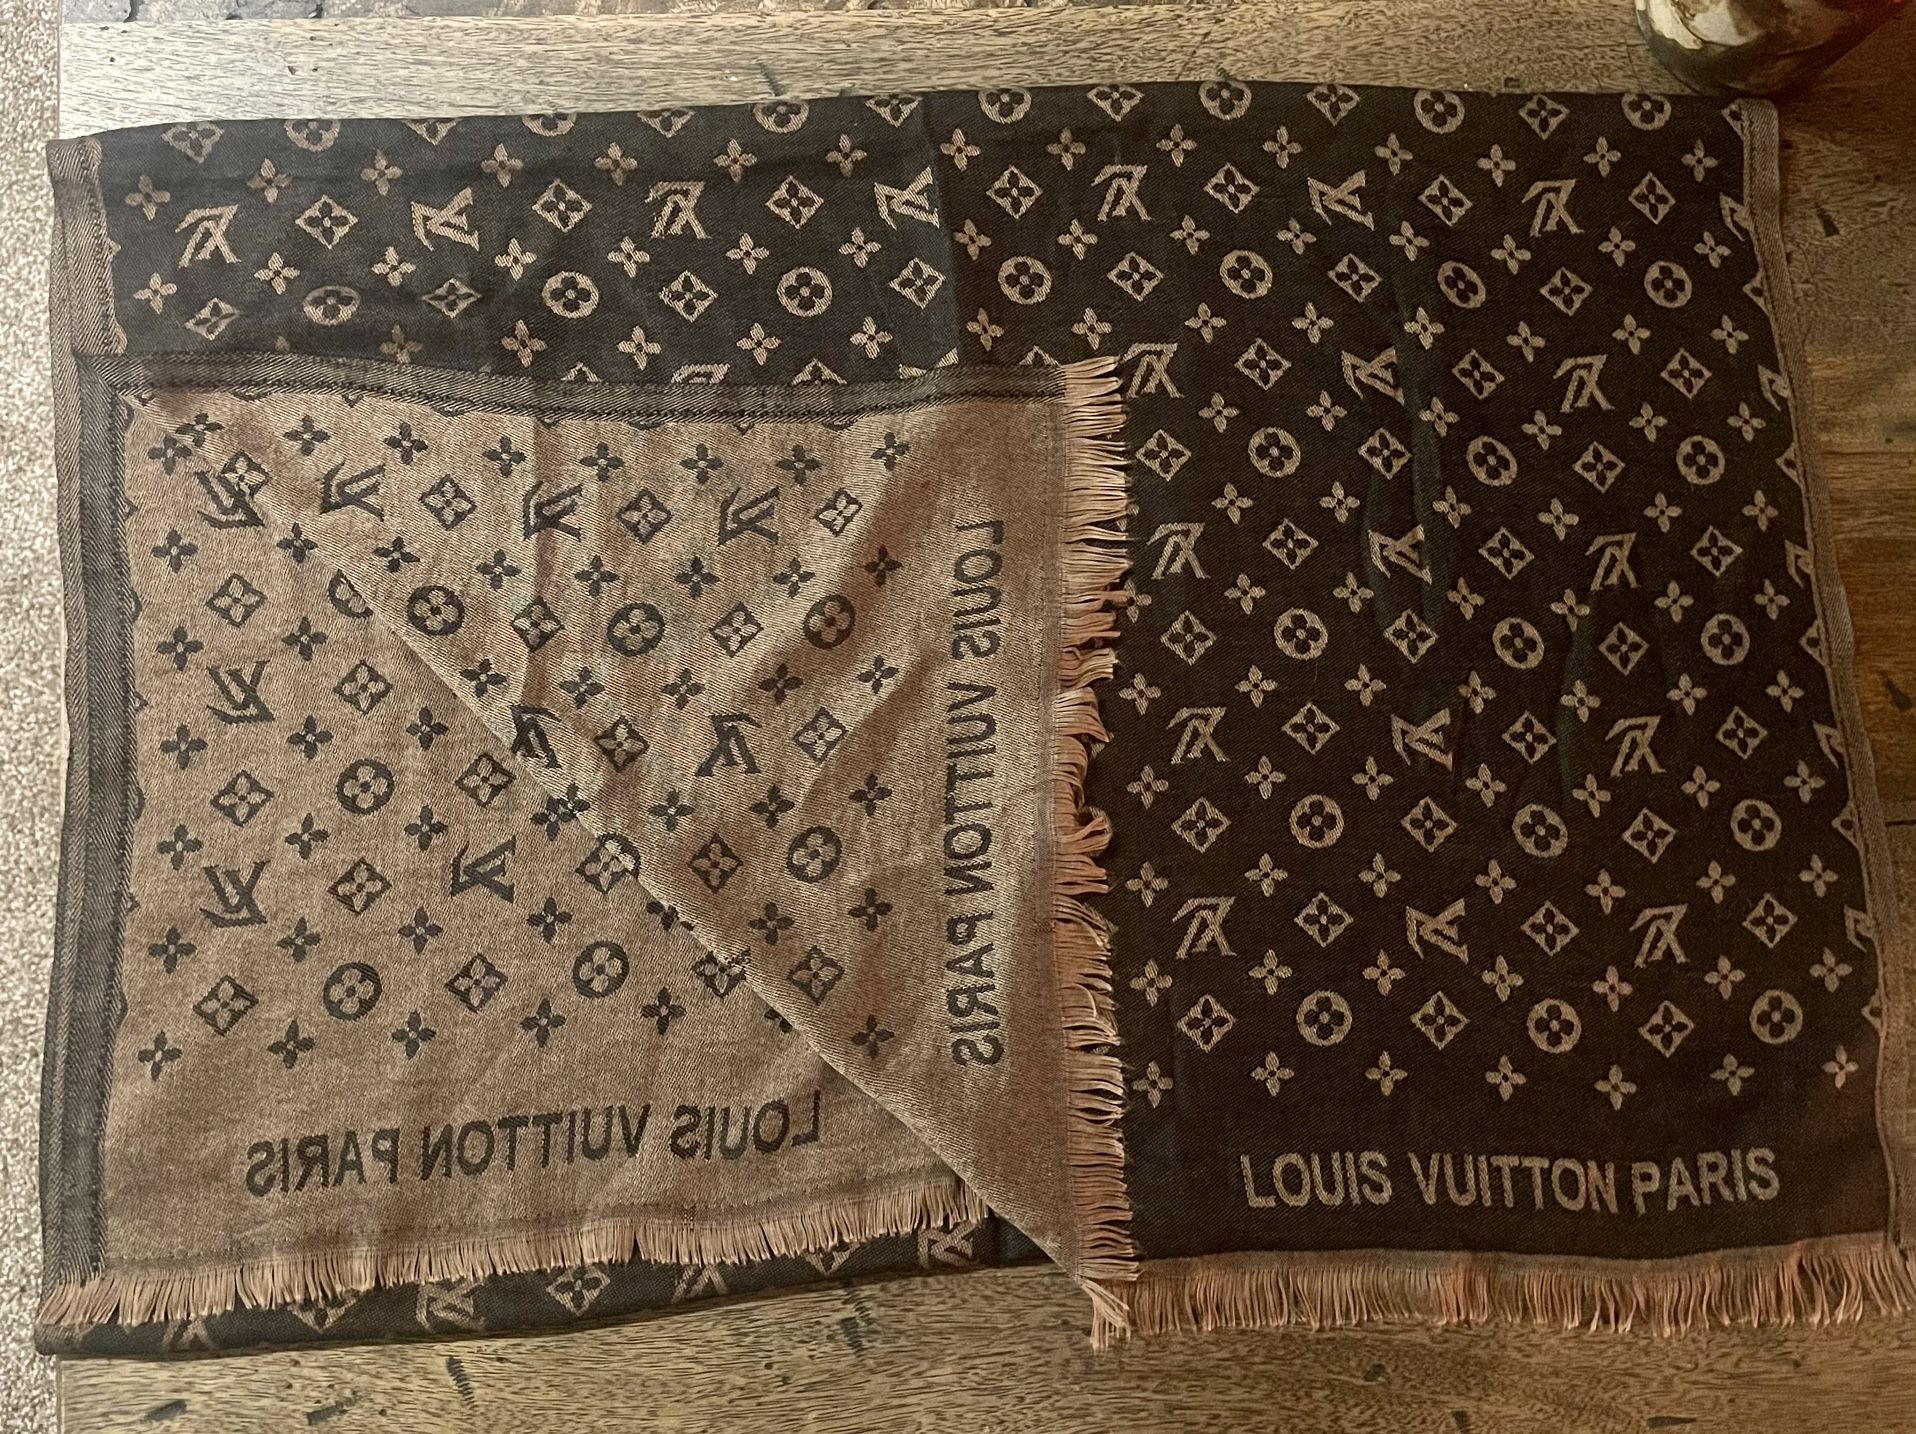 Louis Vuitton Silk Twilly Scarf for Sale in Denver, CO - OfferUp